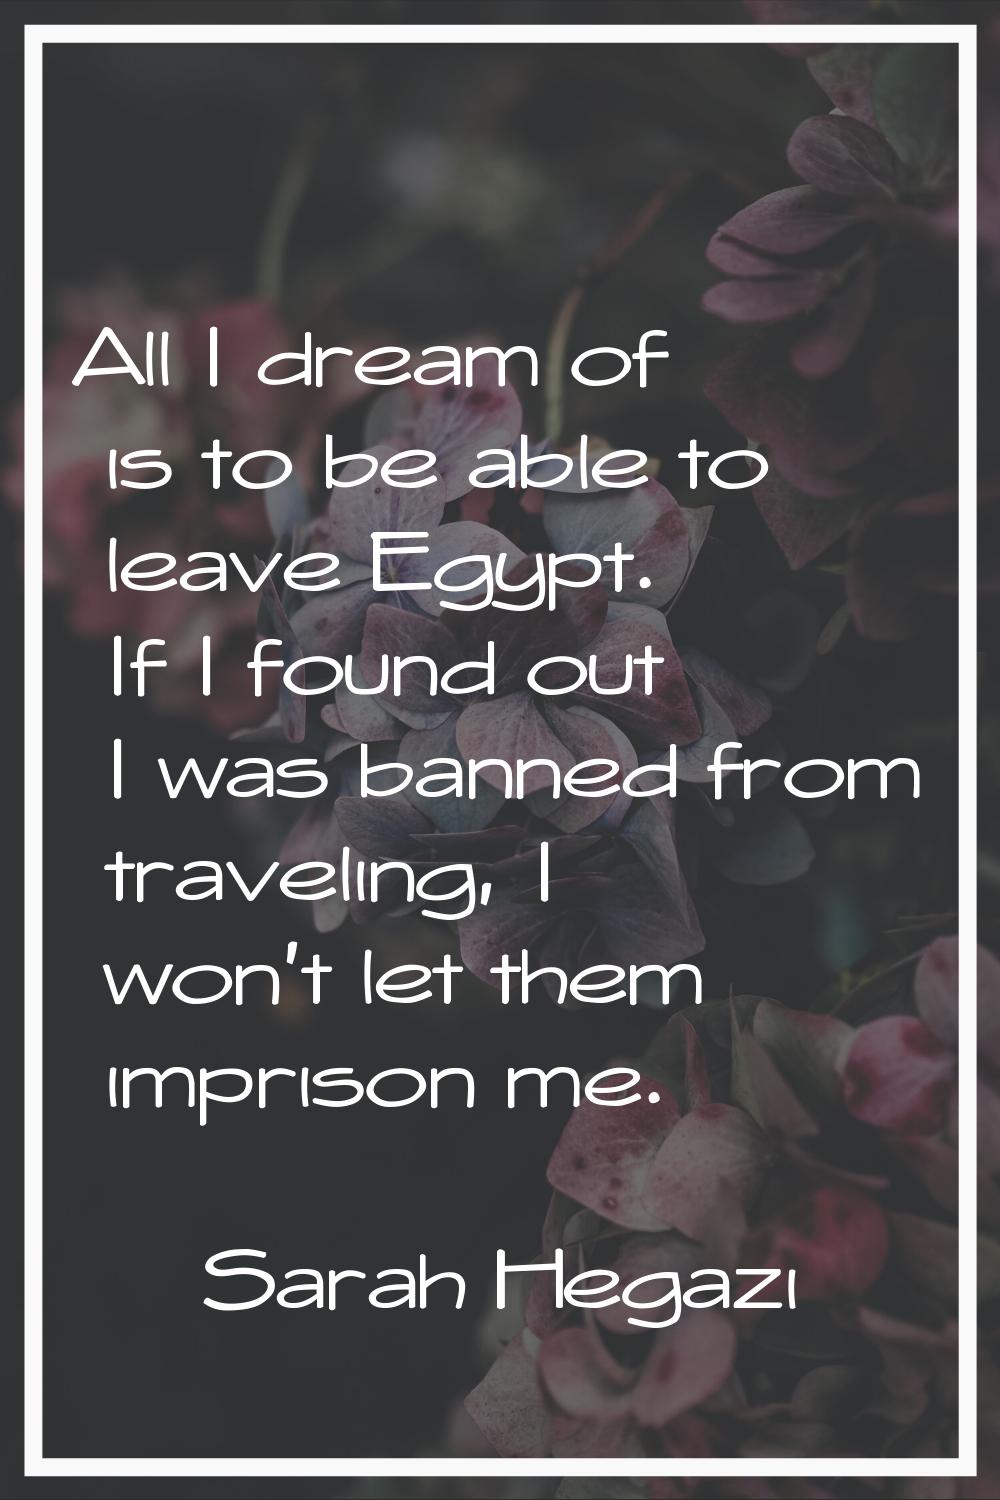 All I dream of is to be able to leave Egypt. If I found out I was banned from traveling, I won't le